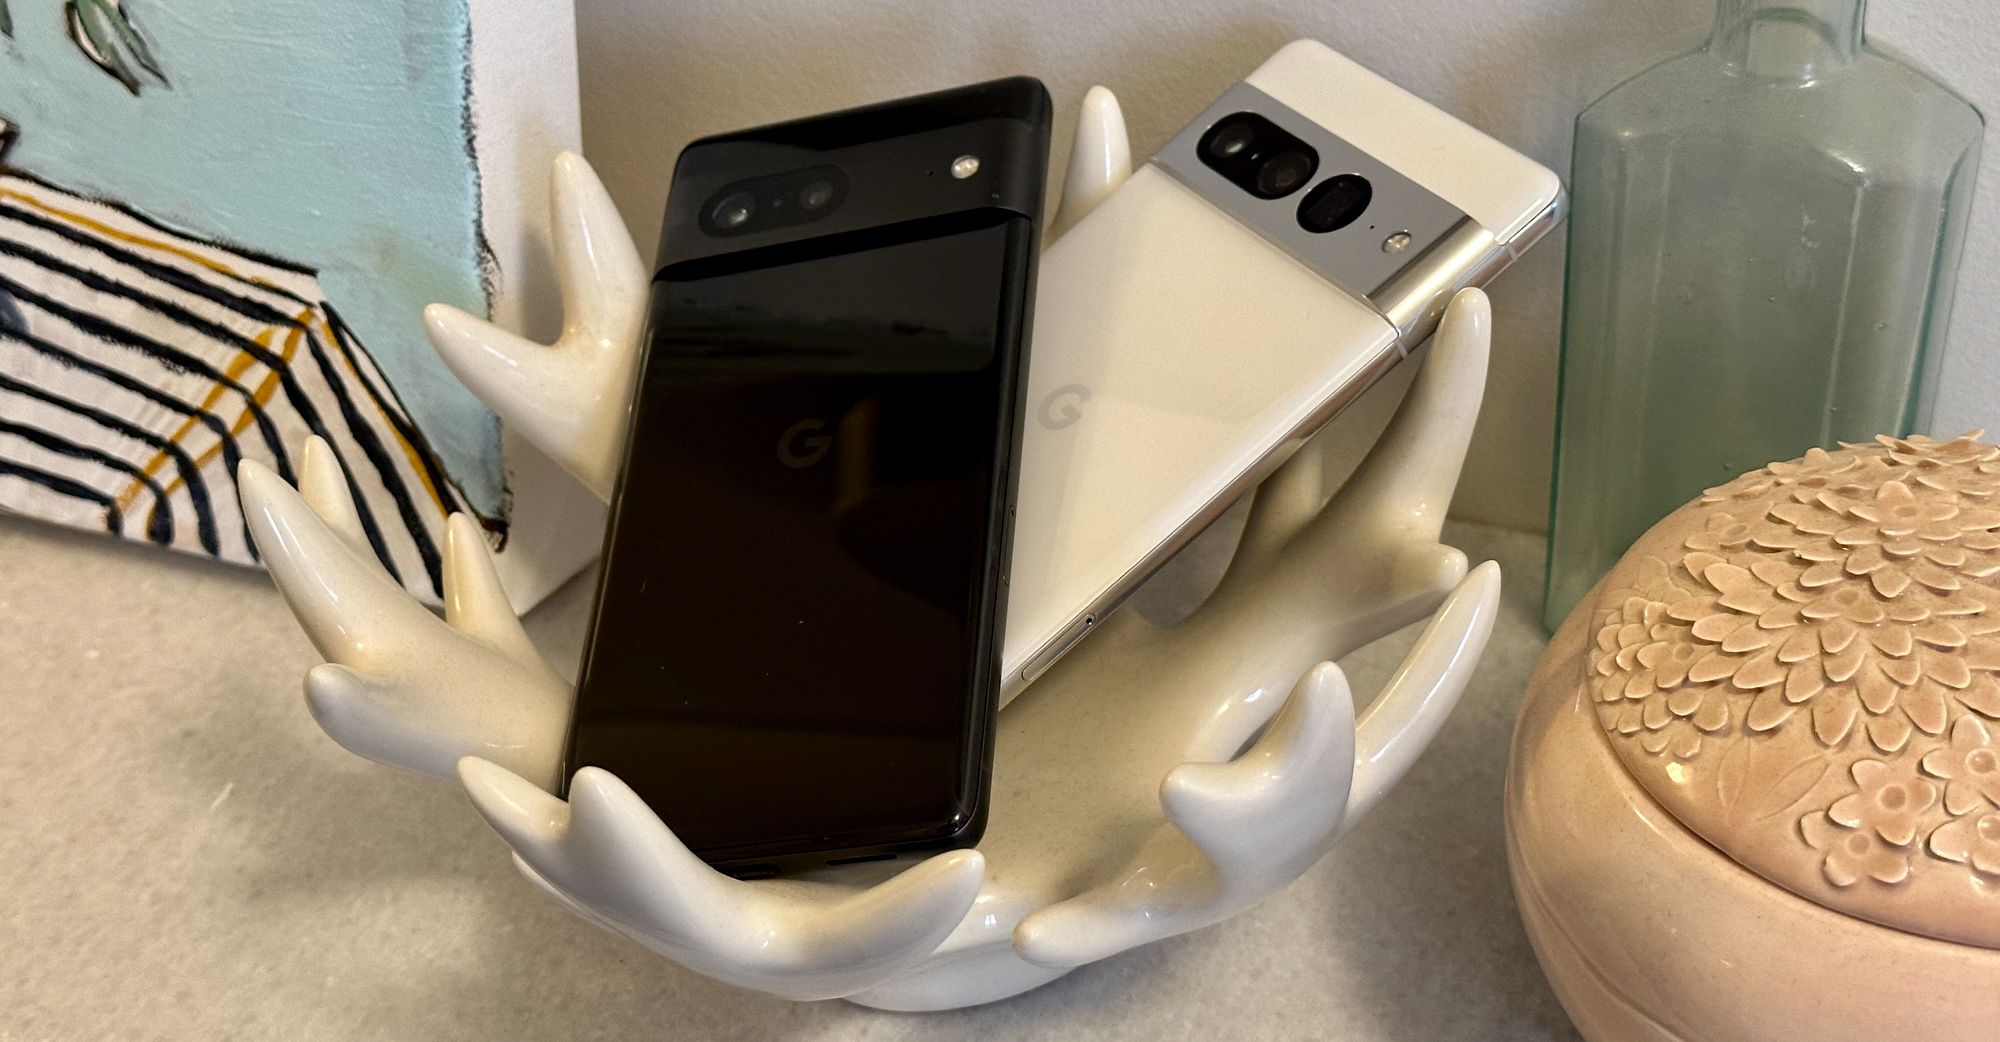 Two phones resting in a fancy dish on a sidetable. The phones are a black Pixel 7 and a while Pixel 7 Pro.